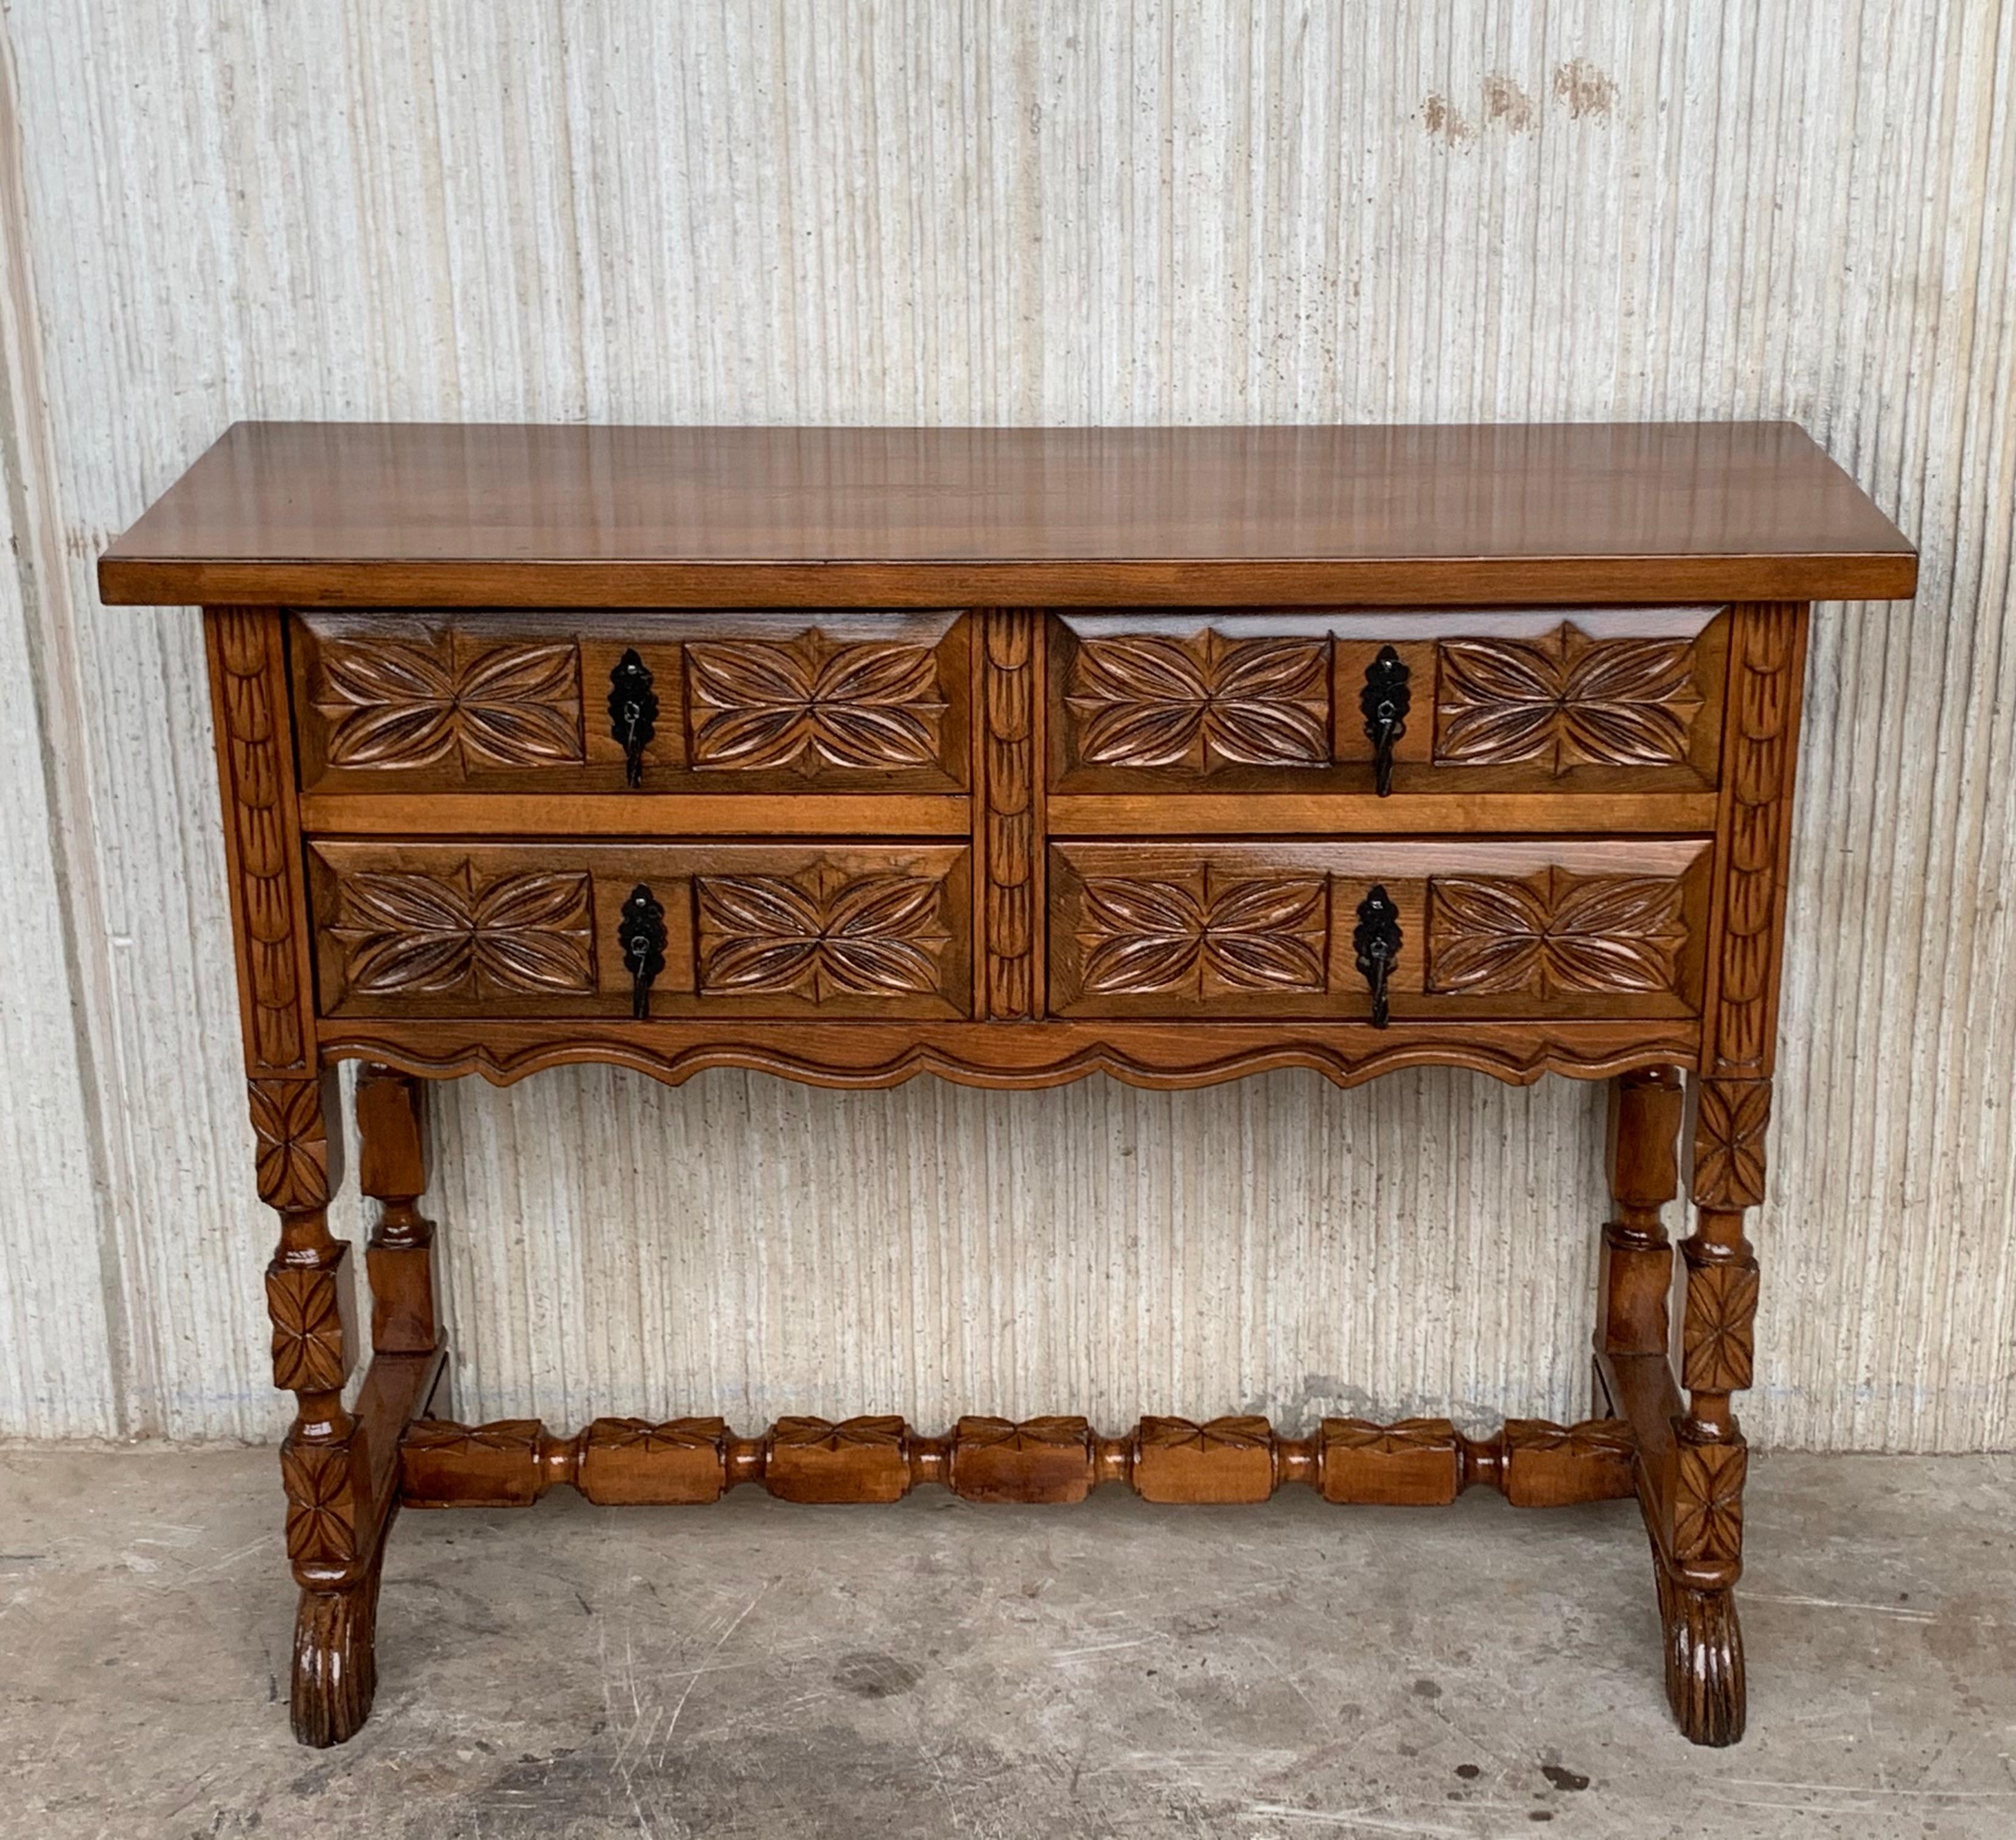 Baroque Revival 19th Century Catalan Spanish Carved Walnut Console Sofa Table, Four Drawers For Sale